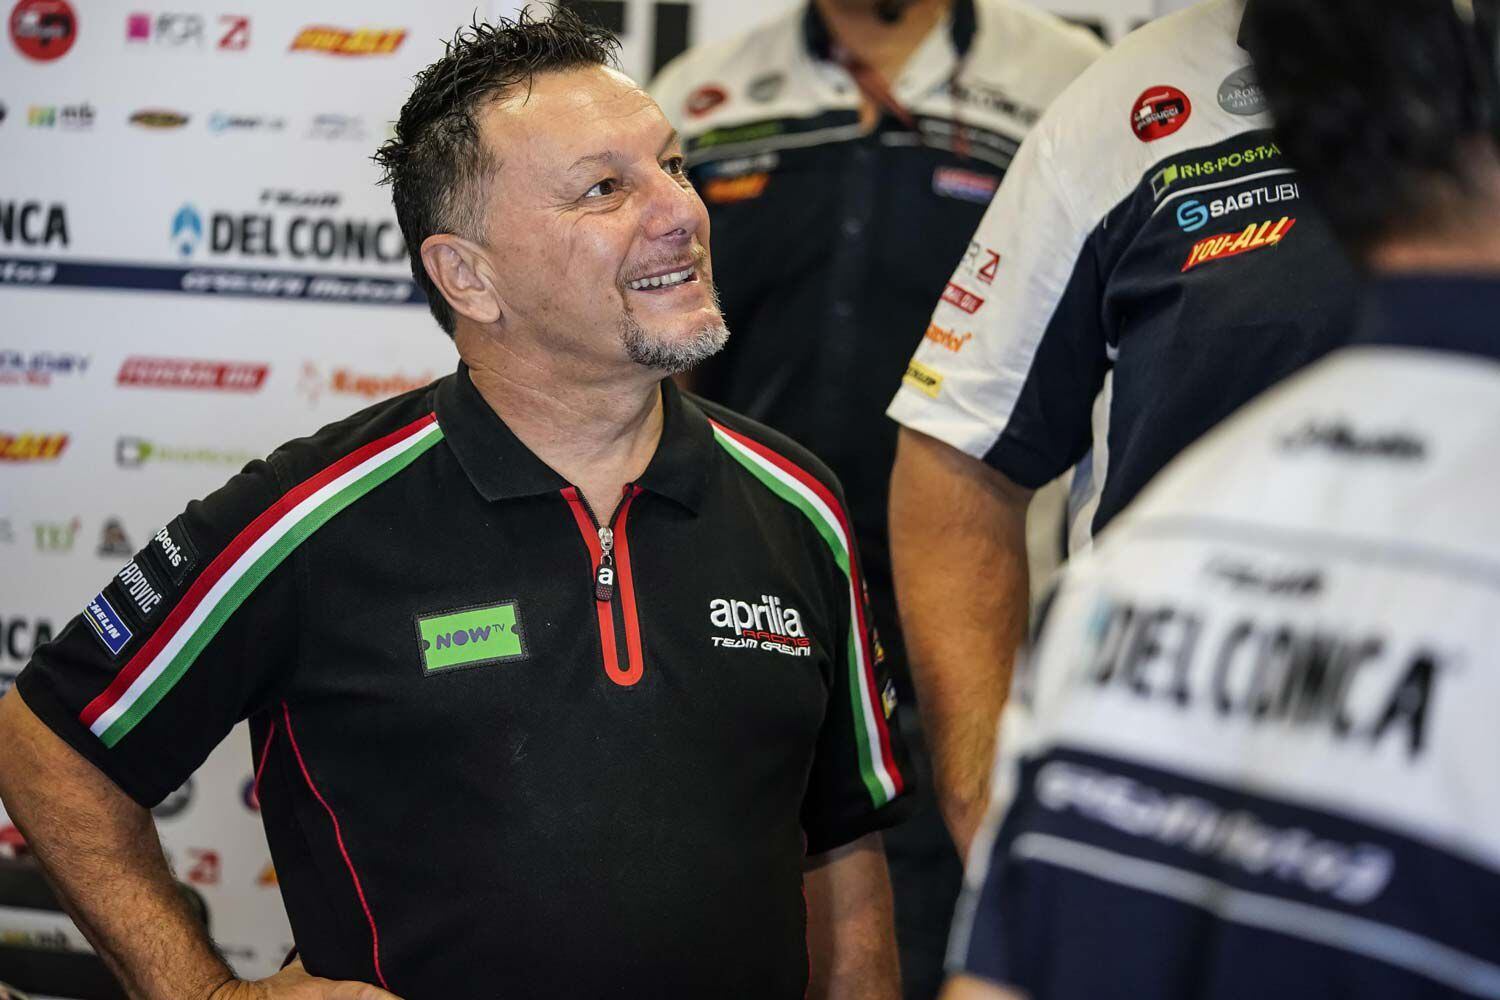 Fausto Gresini passed away February 23, 2021, from complications due to COVID-19.